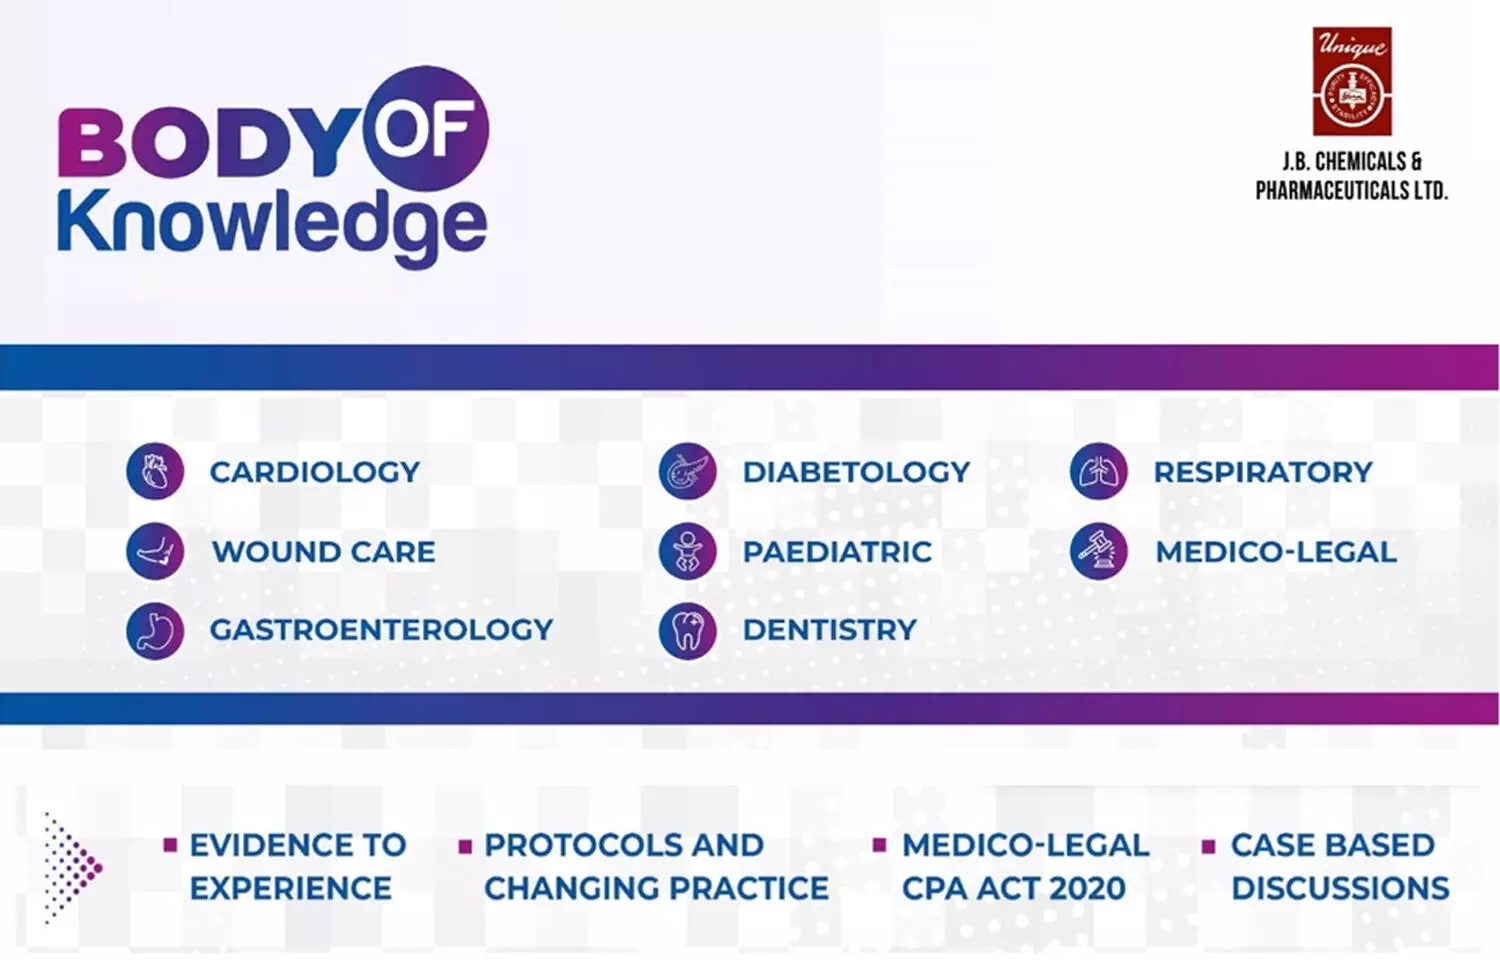 BODY OF KNOWLEDGE (BOK) : J. B. Chemicals initiates a resourceful knowledge-sharing platform for the medical fraternity.